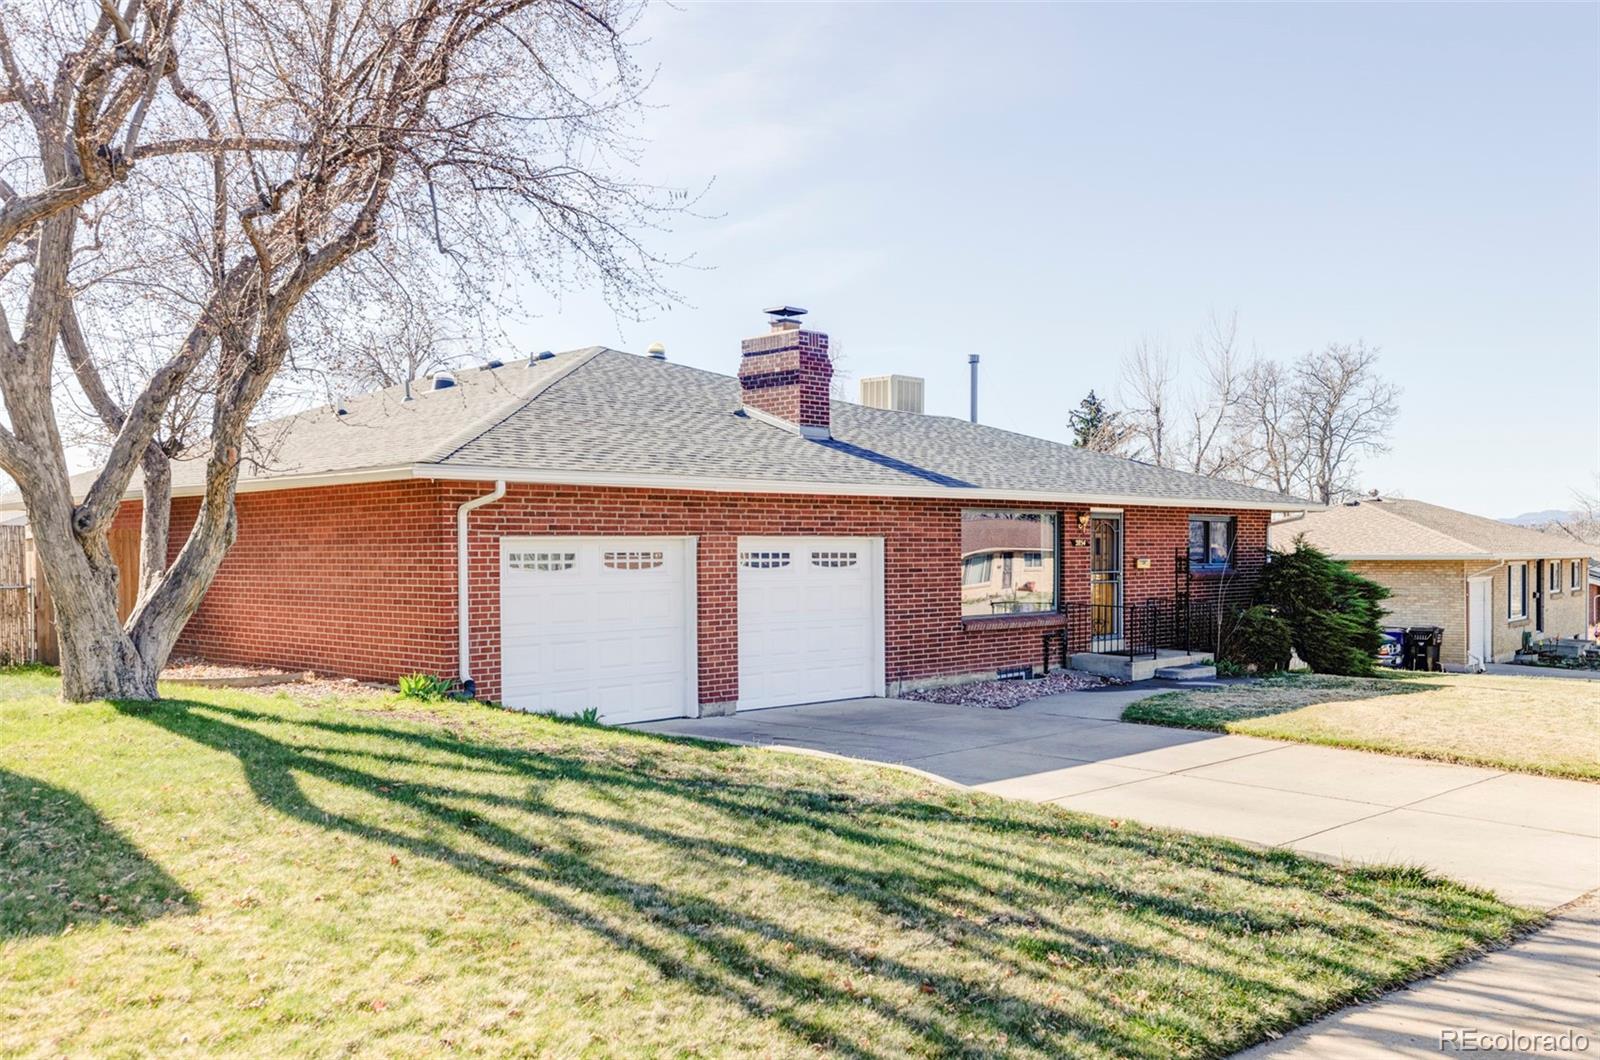 2854 s raleigh street, denver sold home. Closed on 2024-05-06 for $715,000.